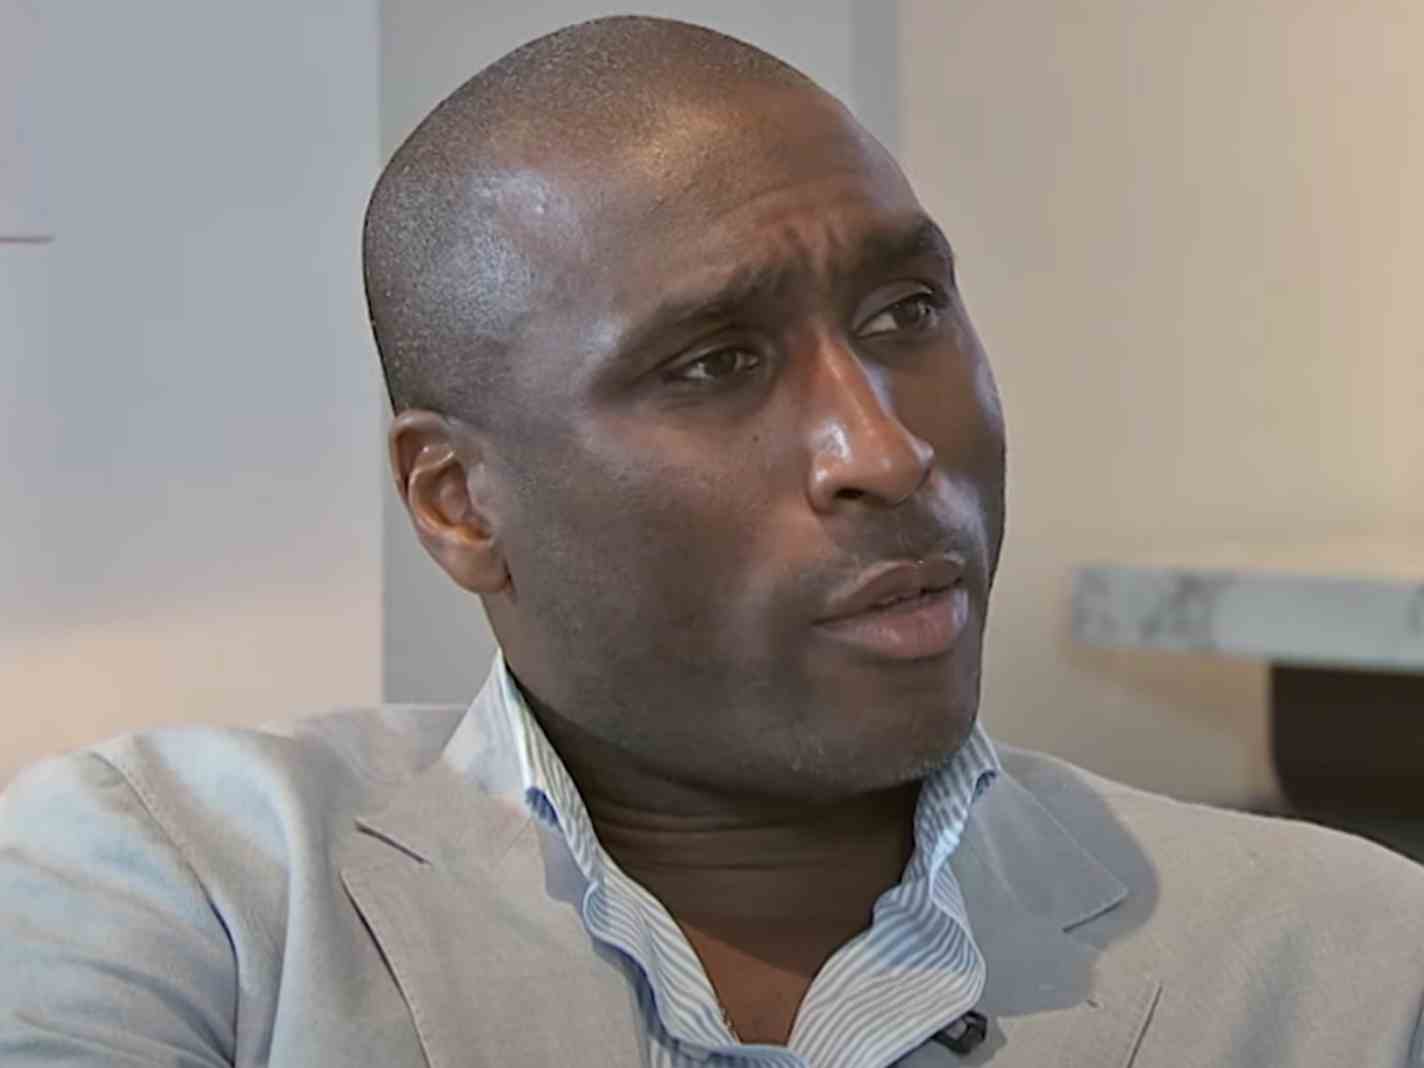 Why Did Sol Campbell Leave Tottenham And What Trophies Did He Win At Arsenal?